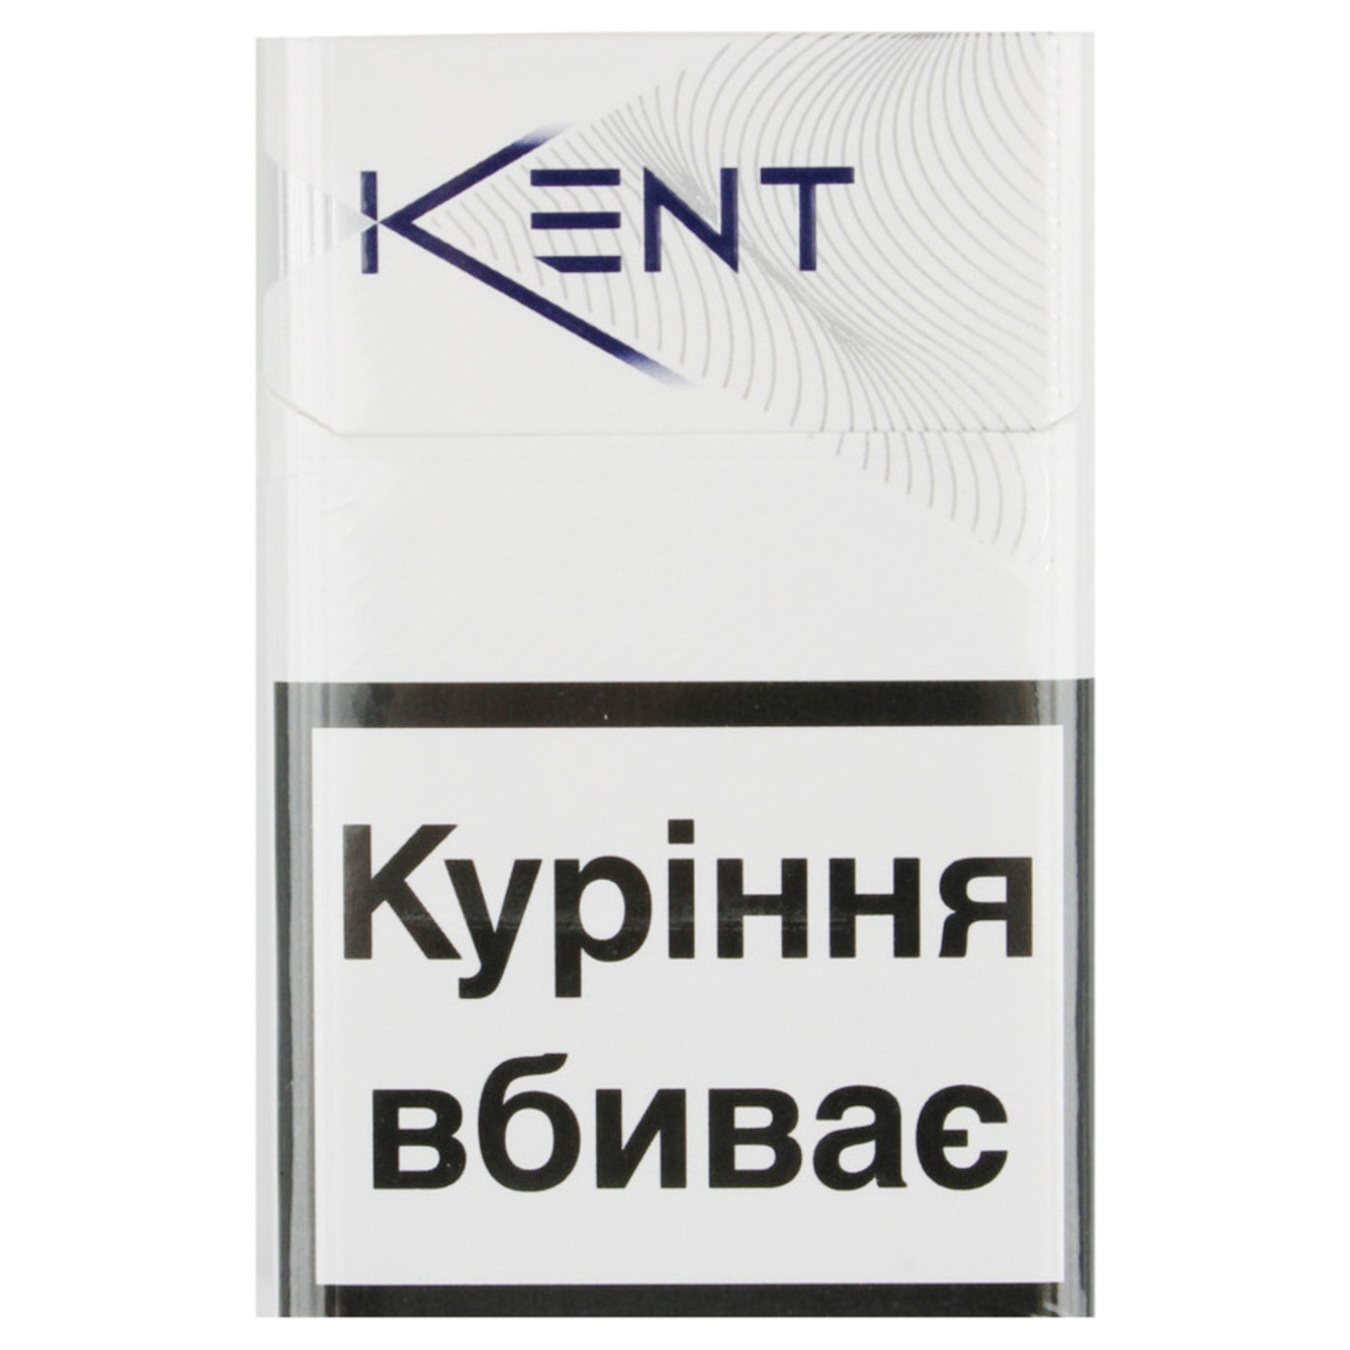 Kent White Infina 1 Cigarettes 20 pcs (the price is indicated without excise tax)